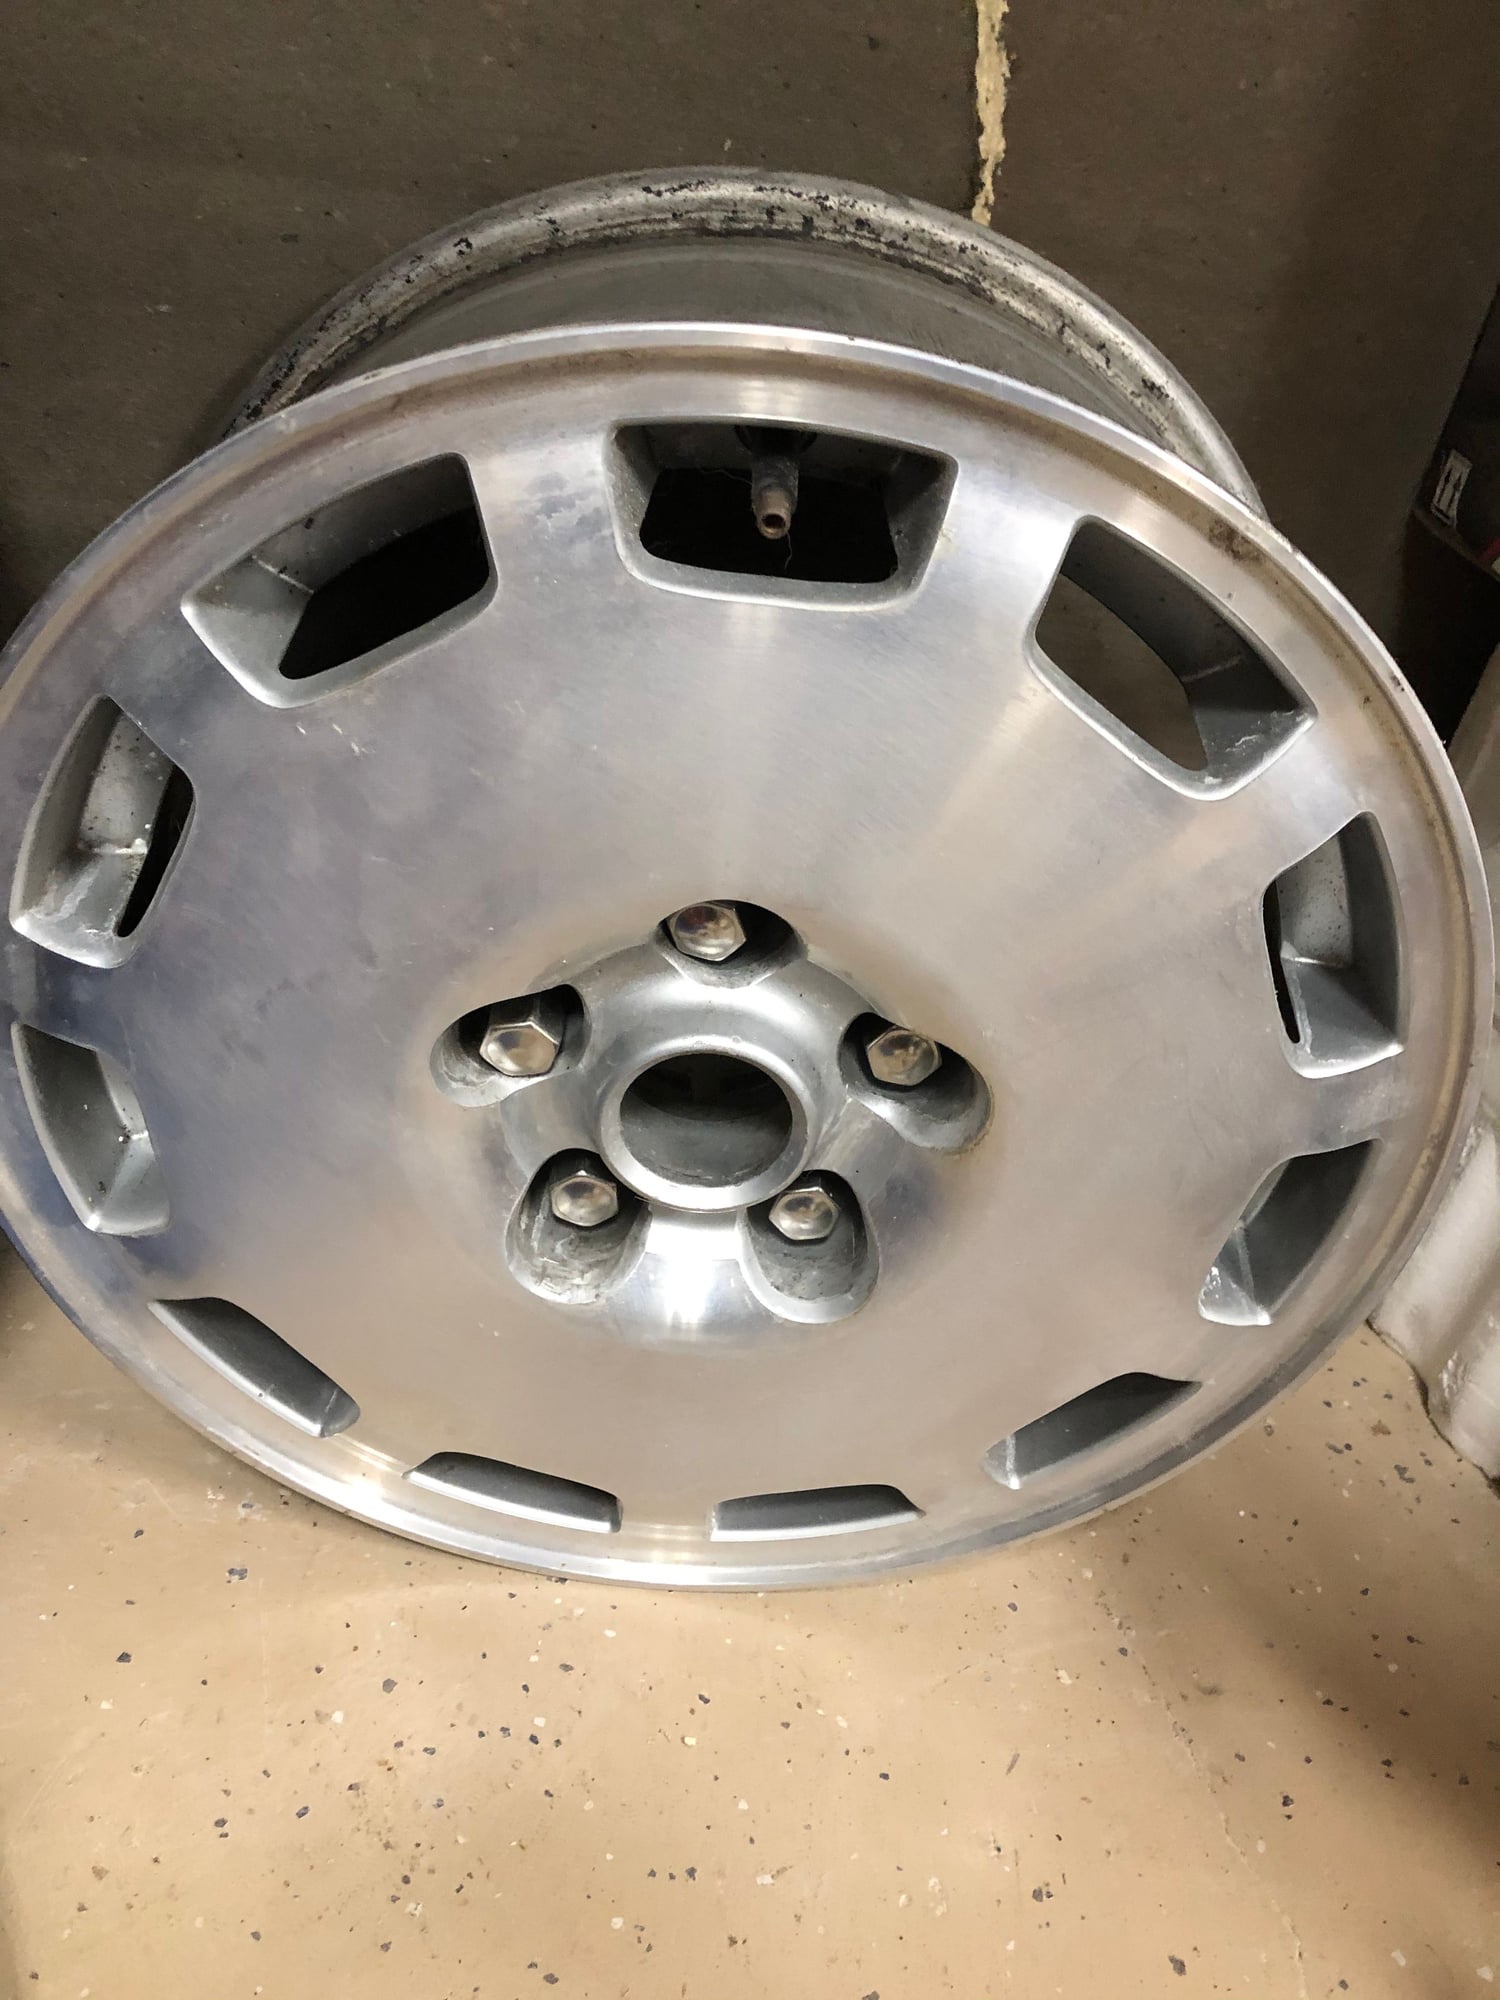 Wheels and Tires/Axles - Original spare rim from ‘96 XJS - Used - 1994 to 1996 Jaguar XJS - Houston, TX 77063, United States